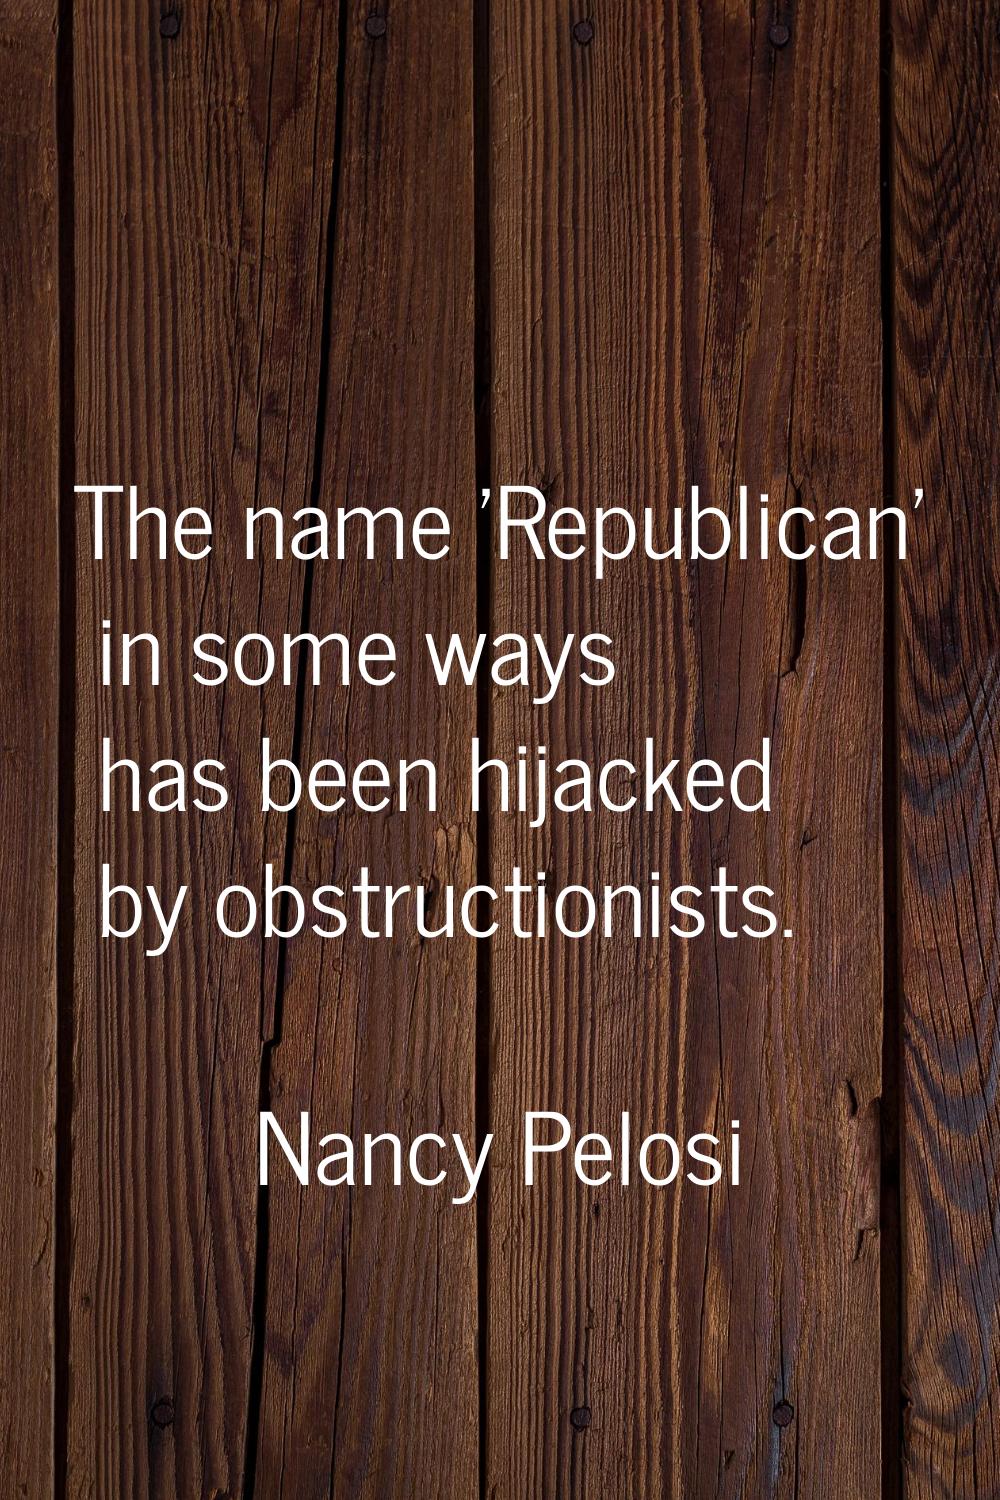 The name 'Republican' in some ways has been hijacked by obstructionists.